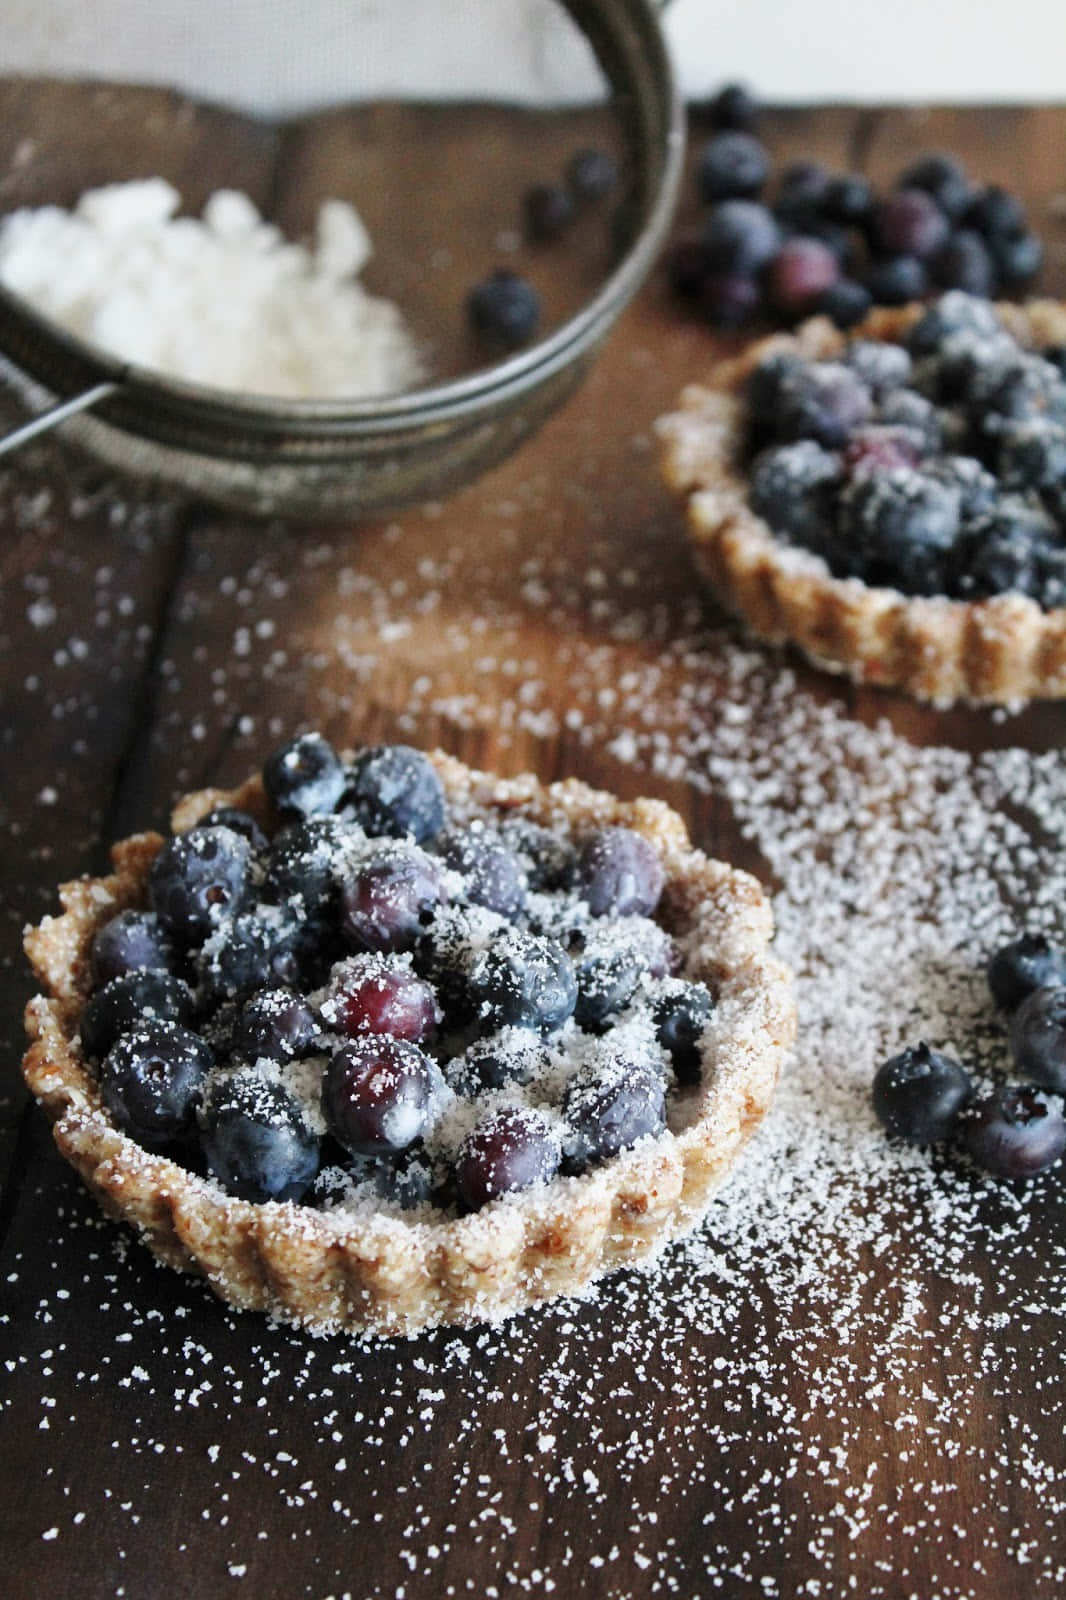 Enjoy a refreshing taste of summer with this delicious Blueberry Tart! Wallpaper